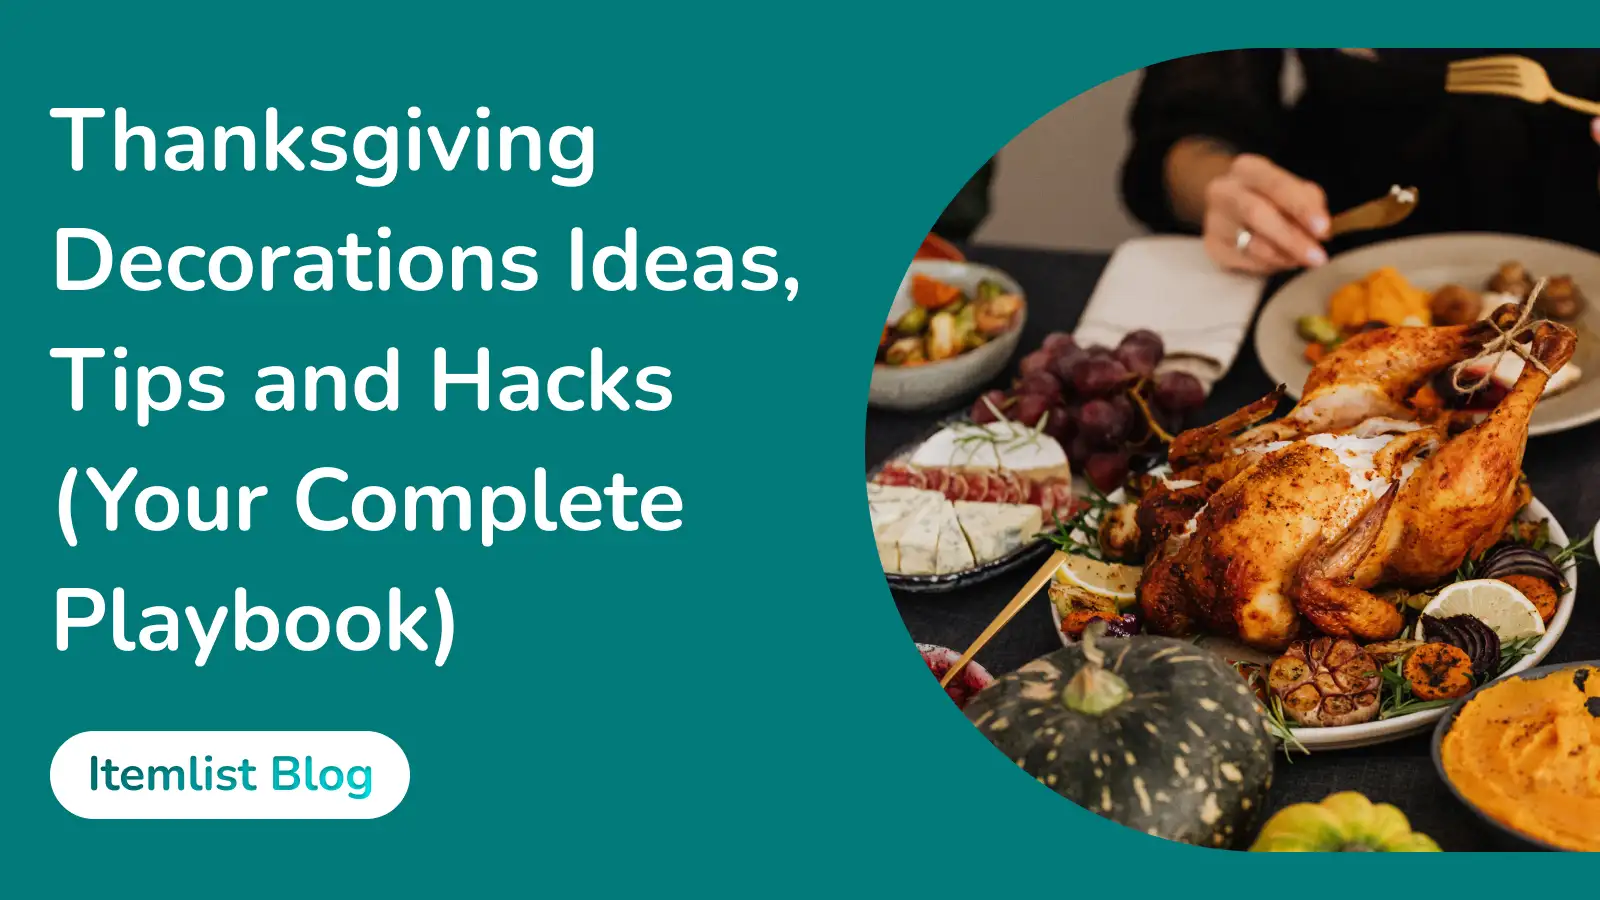 Thanksgiving Decorations Ideas, Tips and Hacks (Your Complete Playbook)